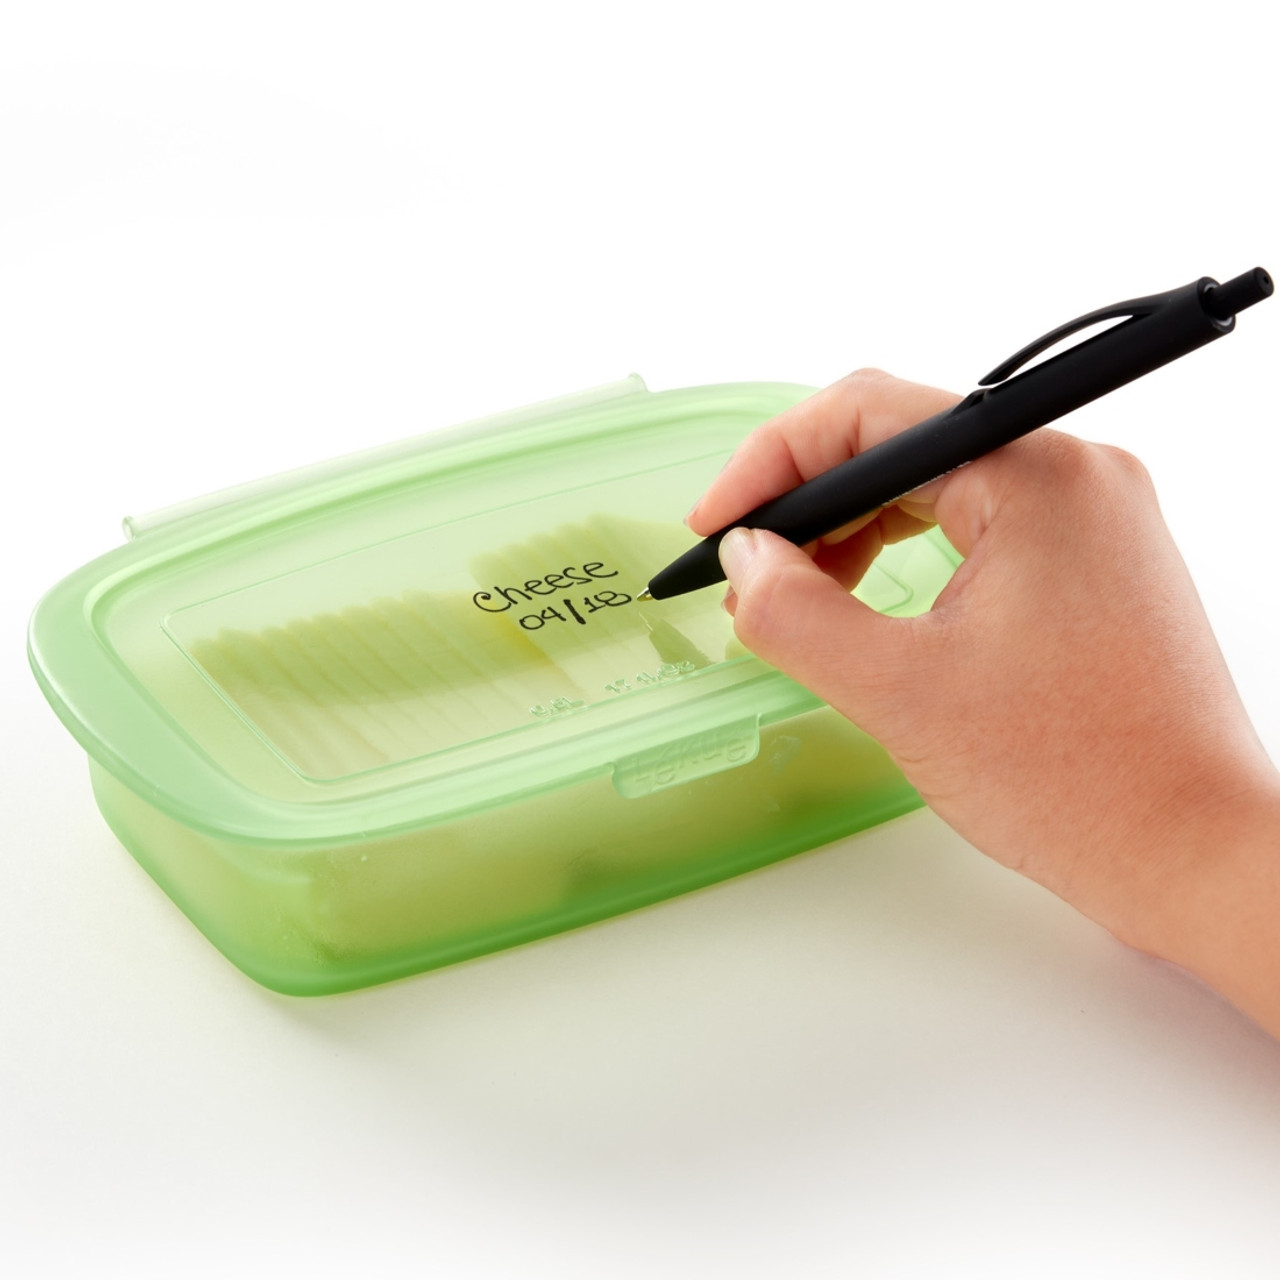 Write on the lid so you know what is inside! 